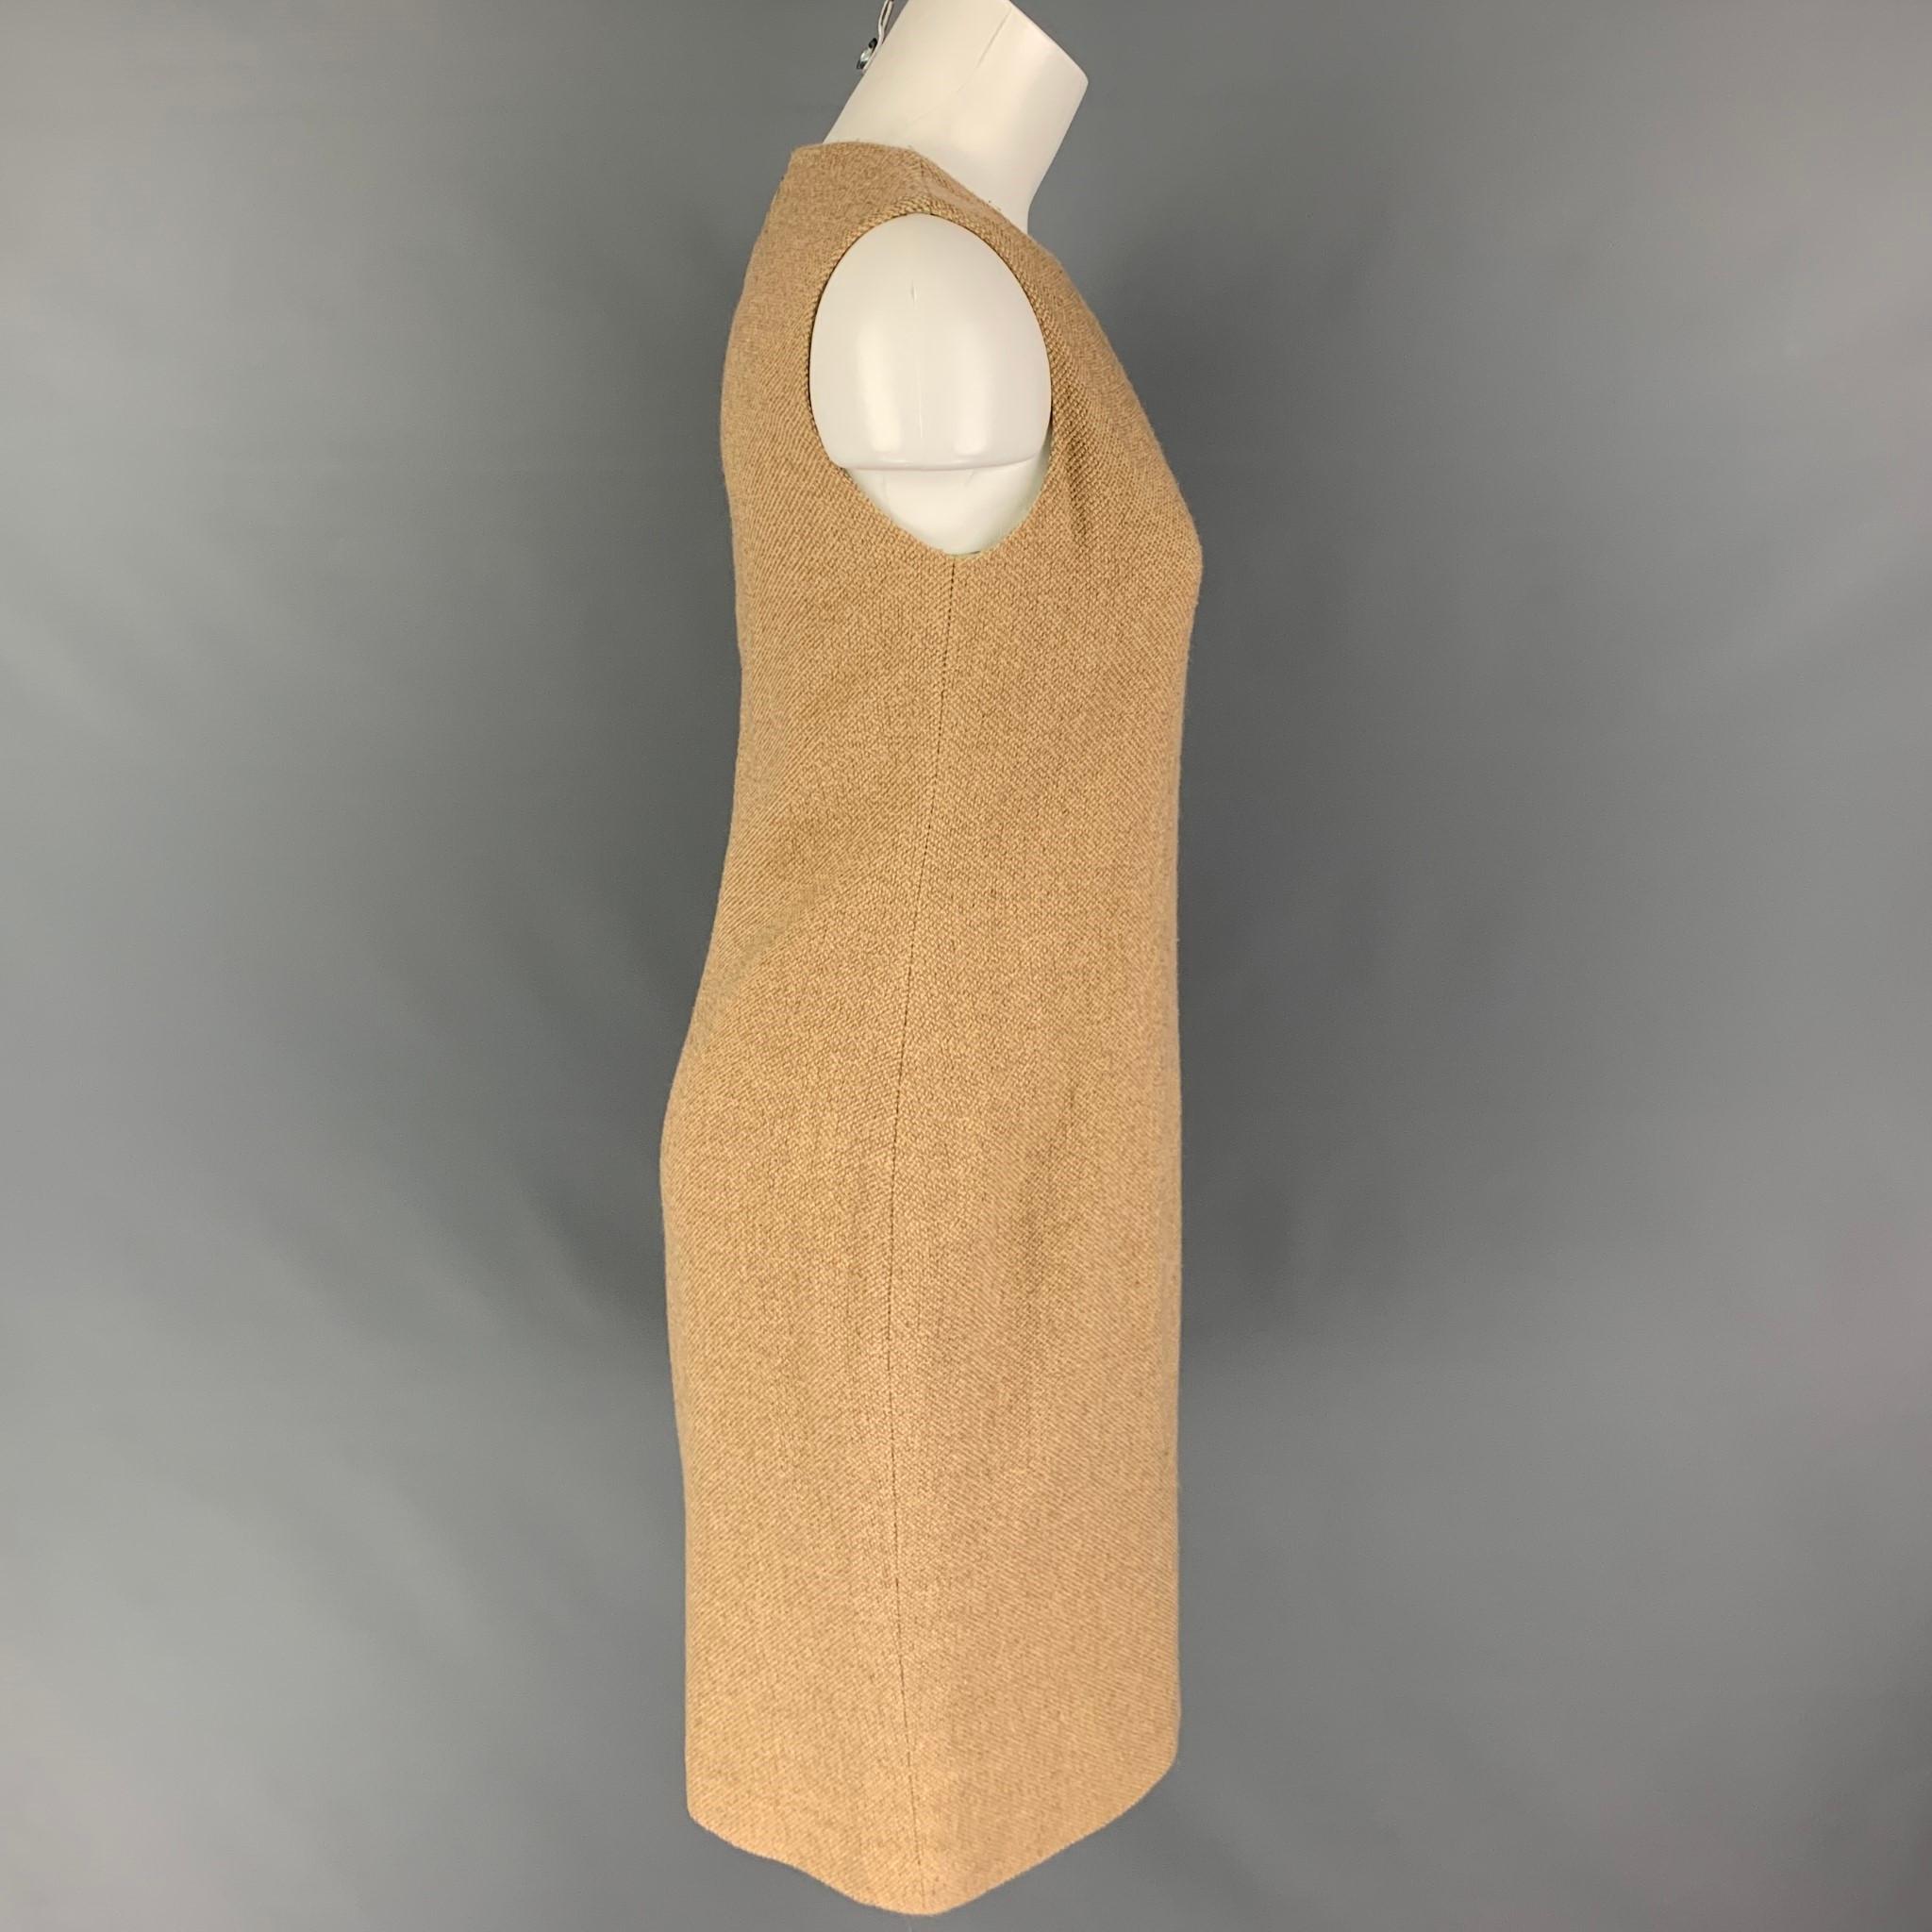 RALPH LAUREN 'Black Label' dress comes in a beige wool blend featuring an a-line style, sleeveless, and a back zipper closure. Made in USA. 

Very Good Pre-Owned Condition.
Marked: 6

Measurements:

Shoulder: 13 in.
Bust: 32 in.
Waist: 32 in.
Hip: